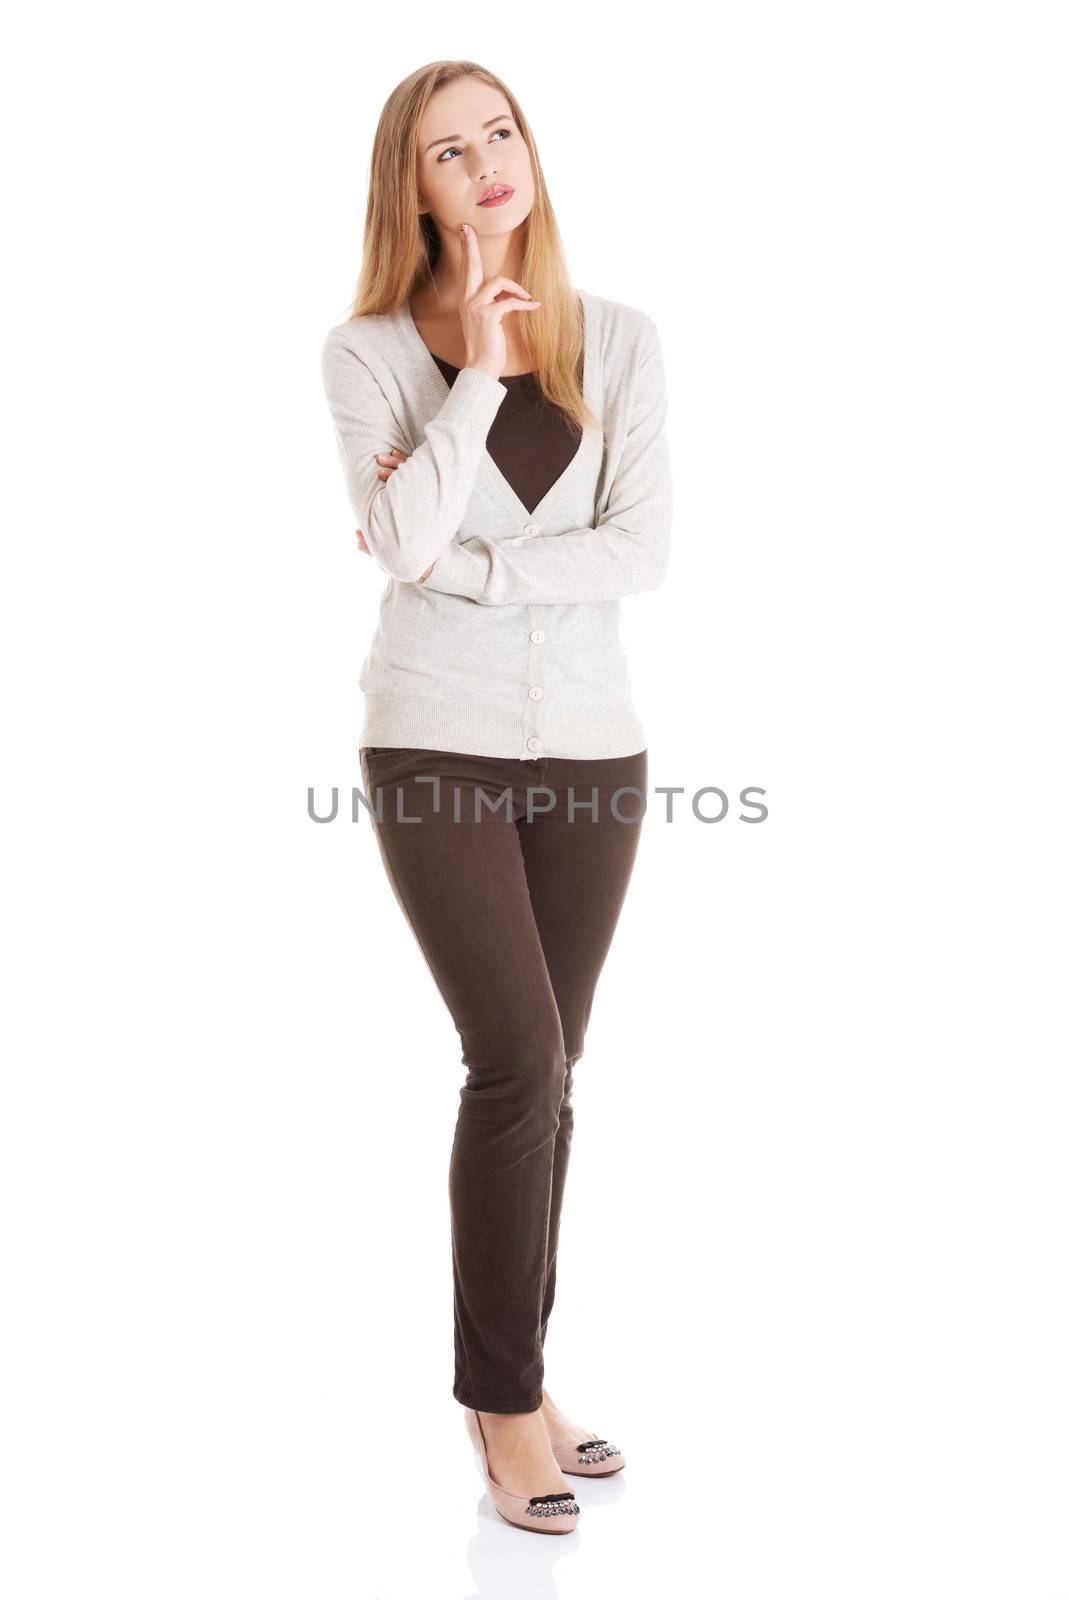 Portrait of beautiful casual woman thinking. Isolated on white.